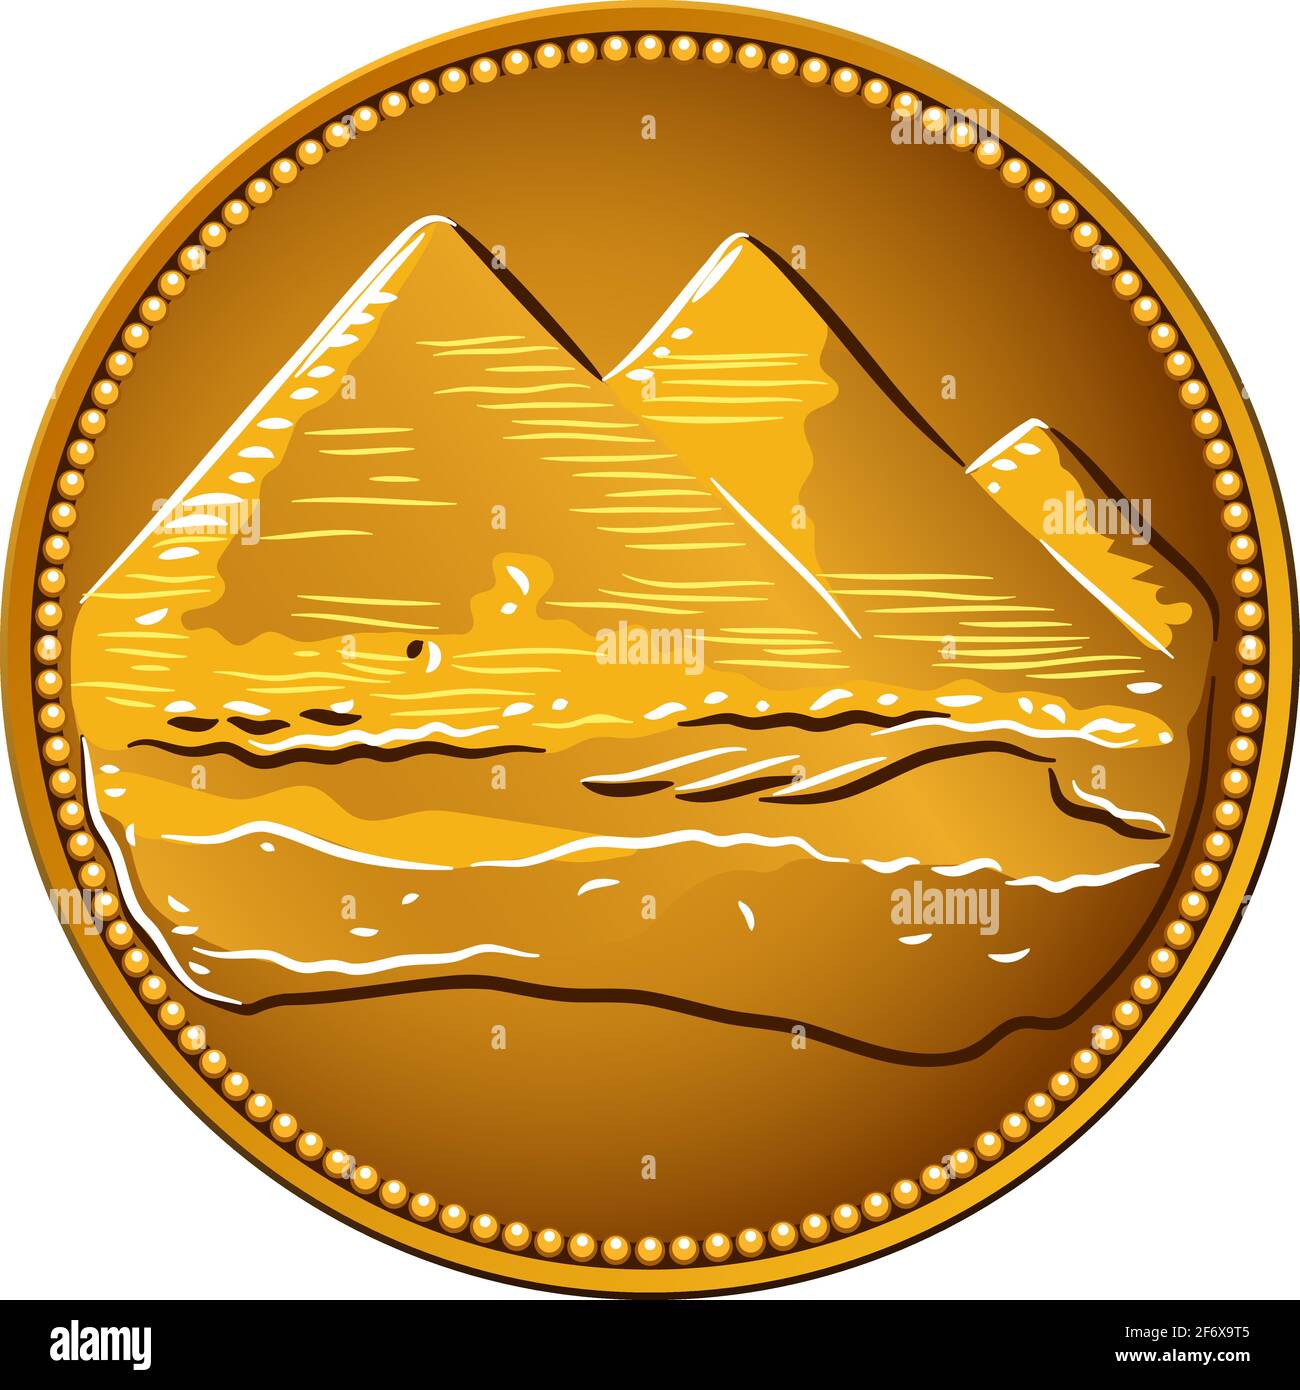 Arab Republic of Egypt, egyptian coin of five piastres, obverse with 3 pyramids of Giza Stock Vector